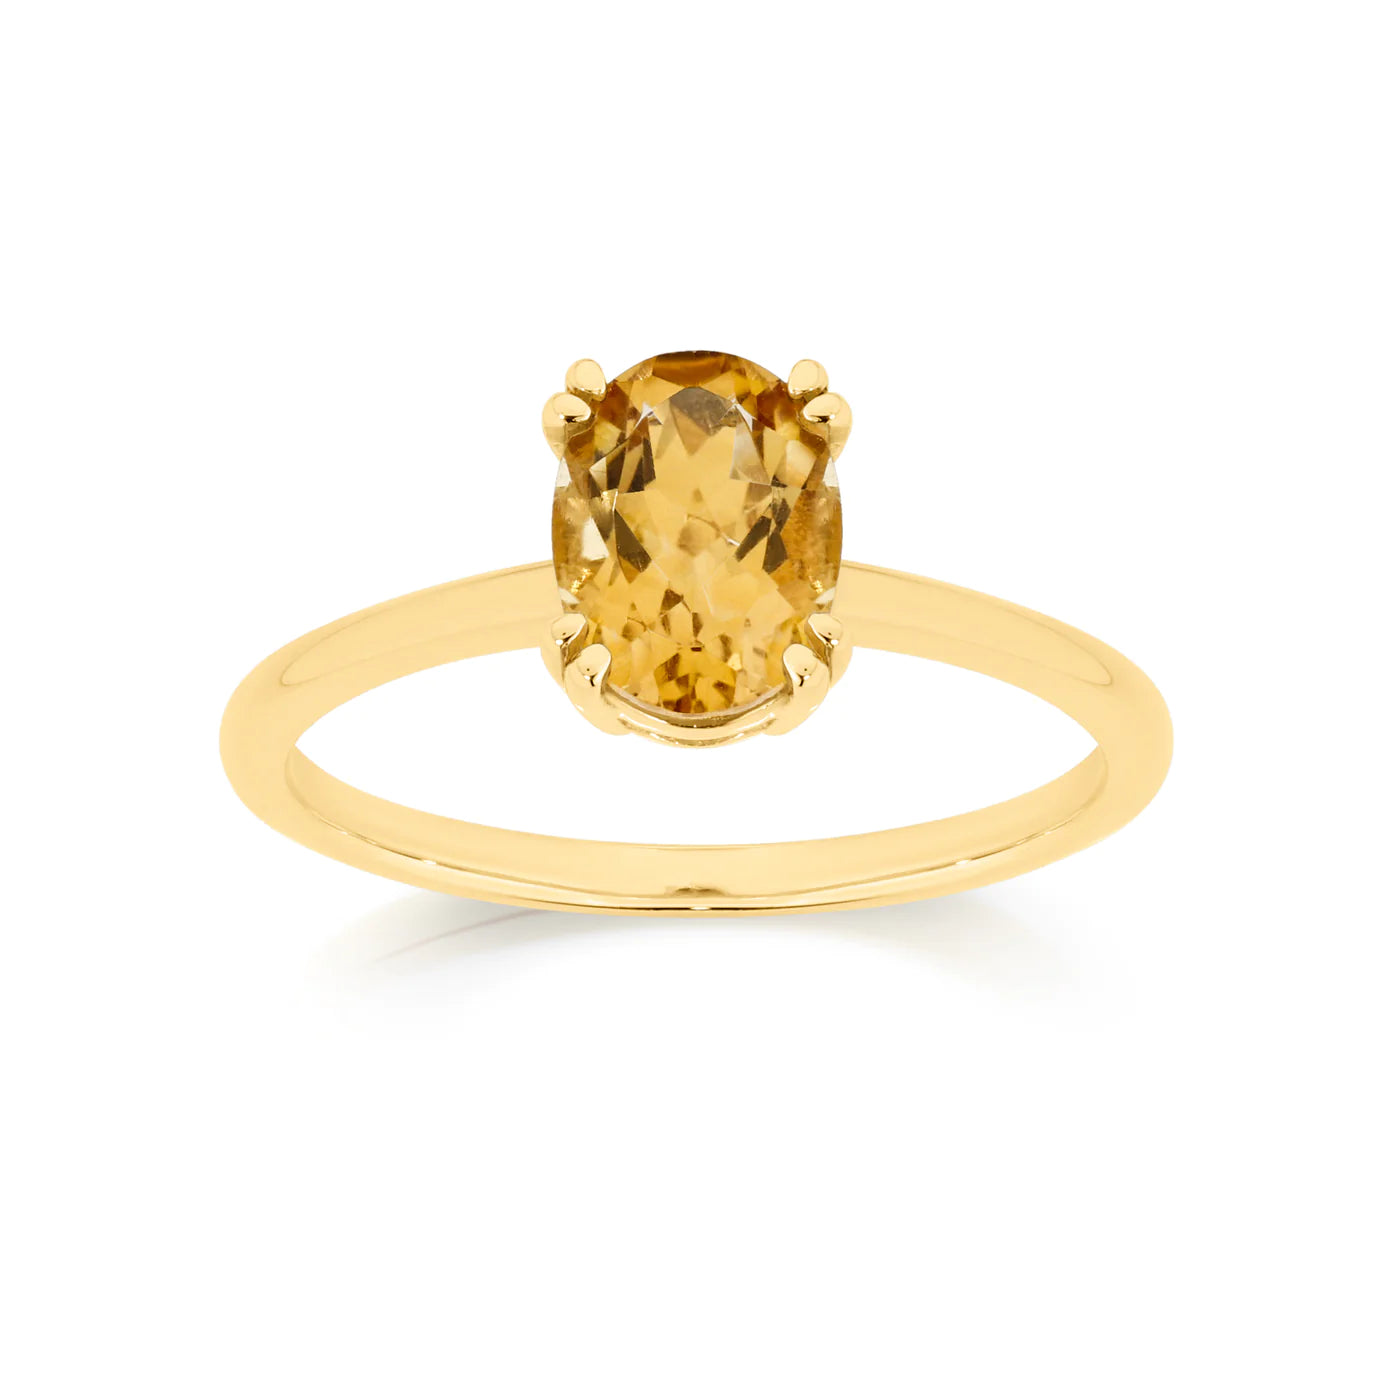 9ct 8x6mm oval citrine solitaire